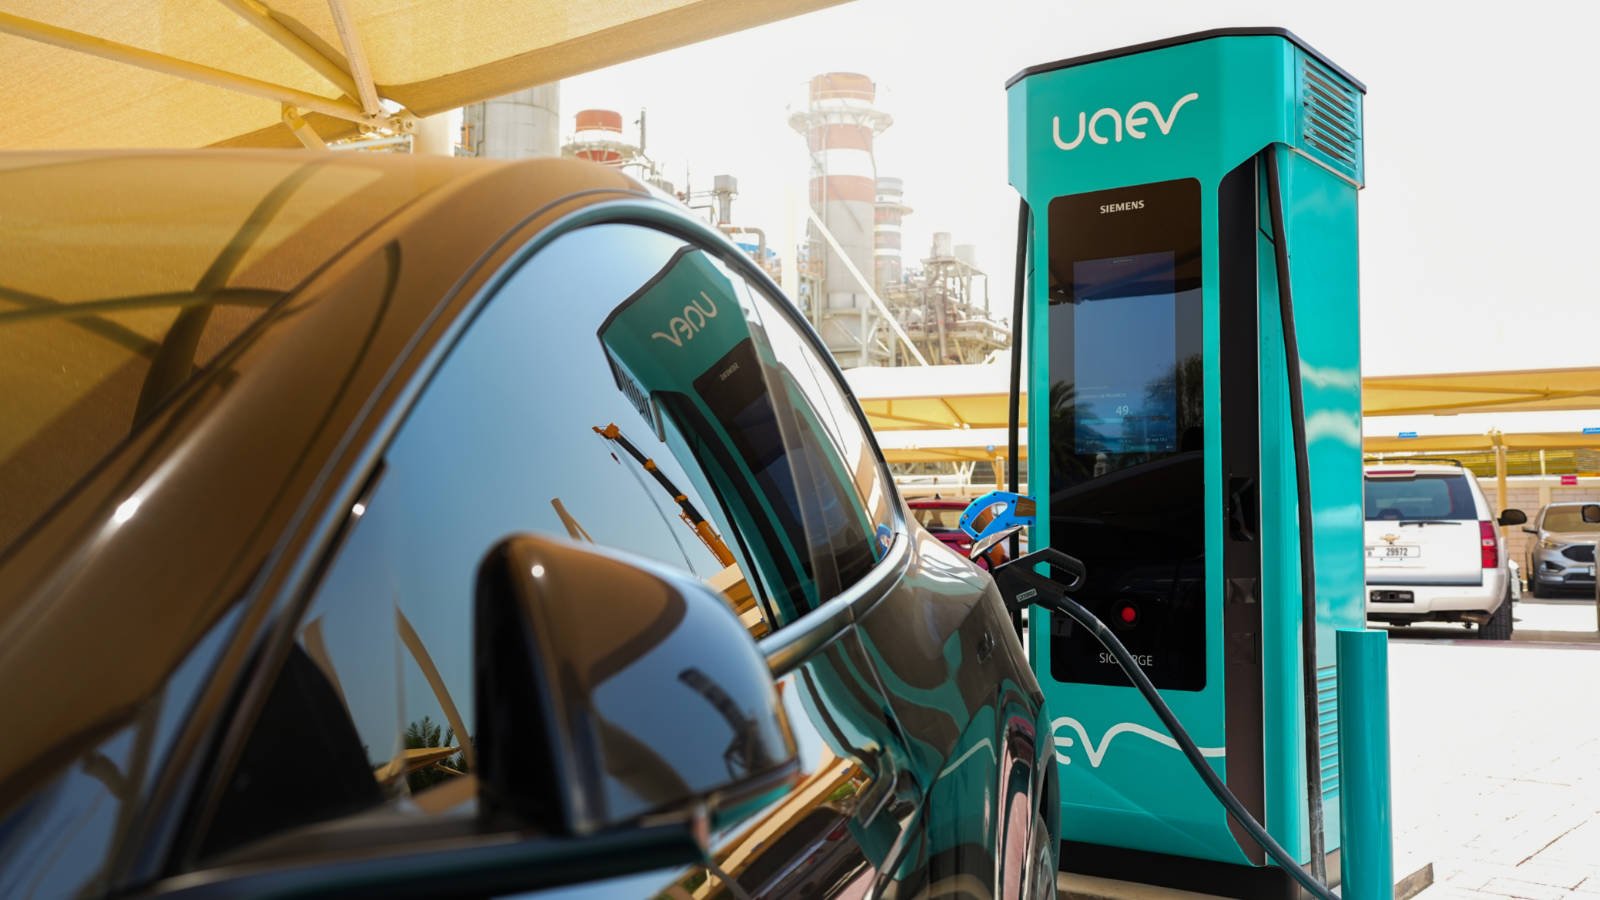 New UAEV Fast Charging Network Launched: Here Are All Details